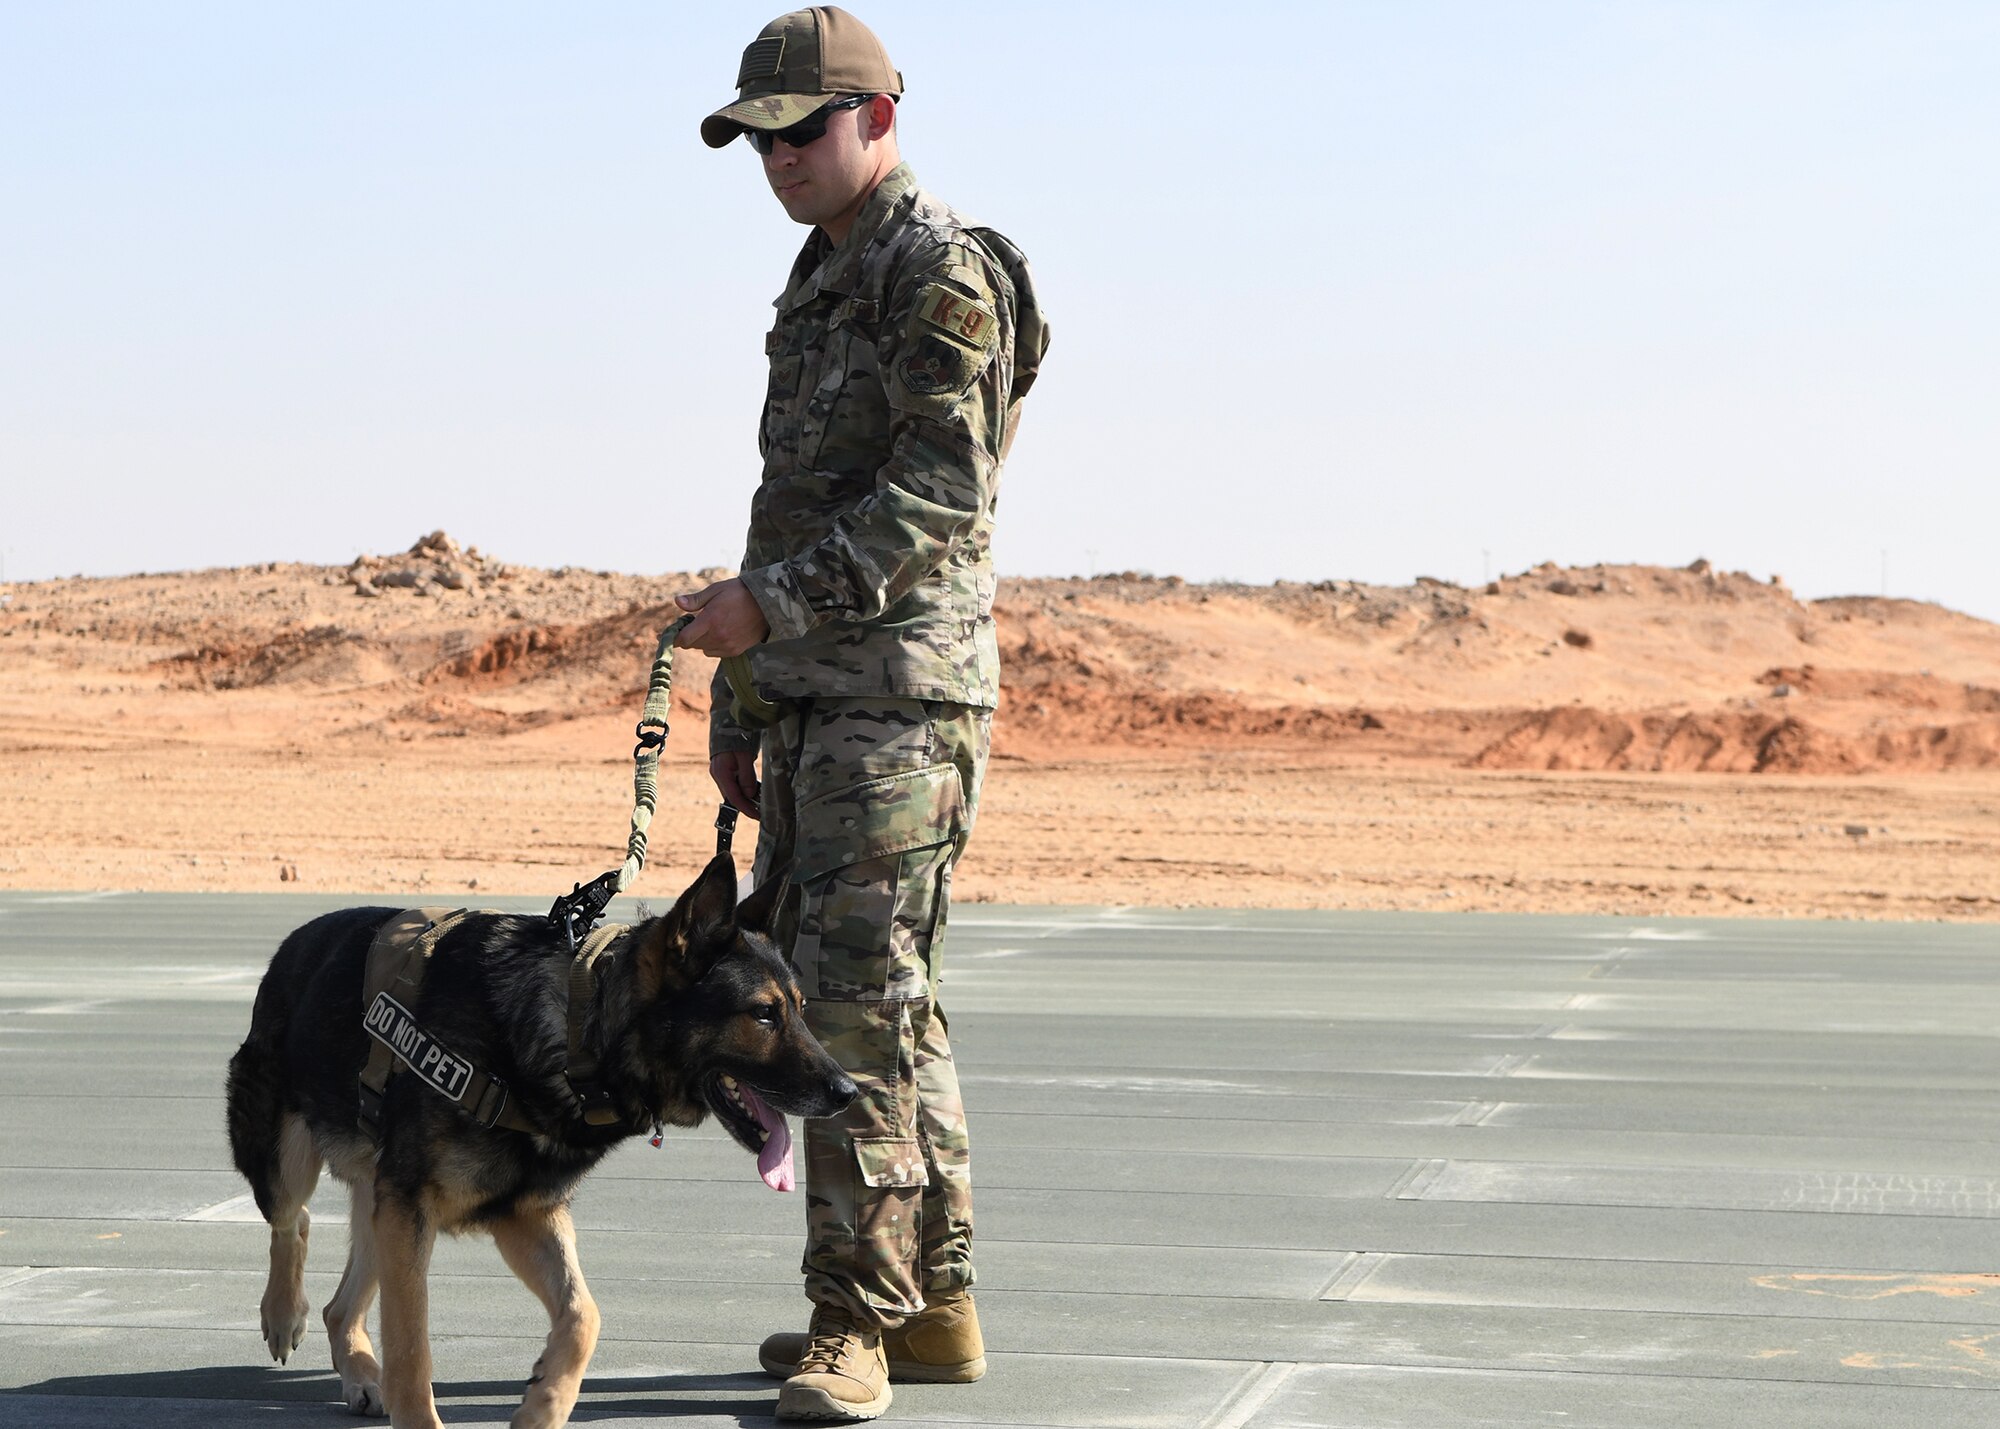 U.S. Air Force Staff Sgt. Zach Floto, 378th Expeditionary Security Forces Squadron K-9 handler, waits with his military working dog, Robi, for a medical evacuation training Nov. 27, 2019, at Prince Sultan Air Base, Saudi Arabia.